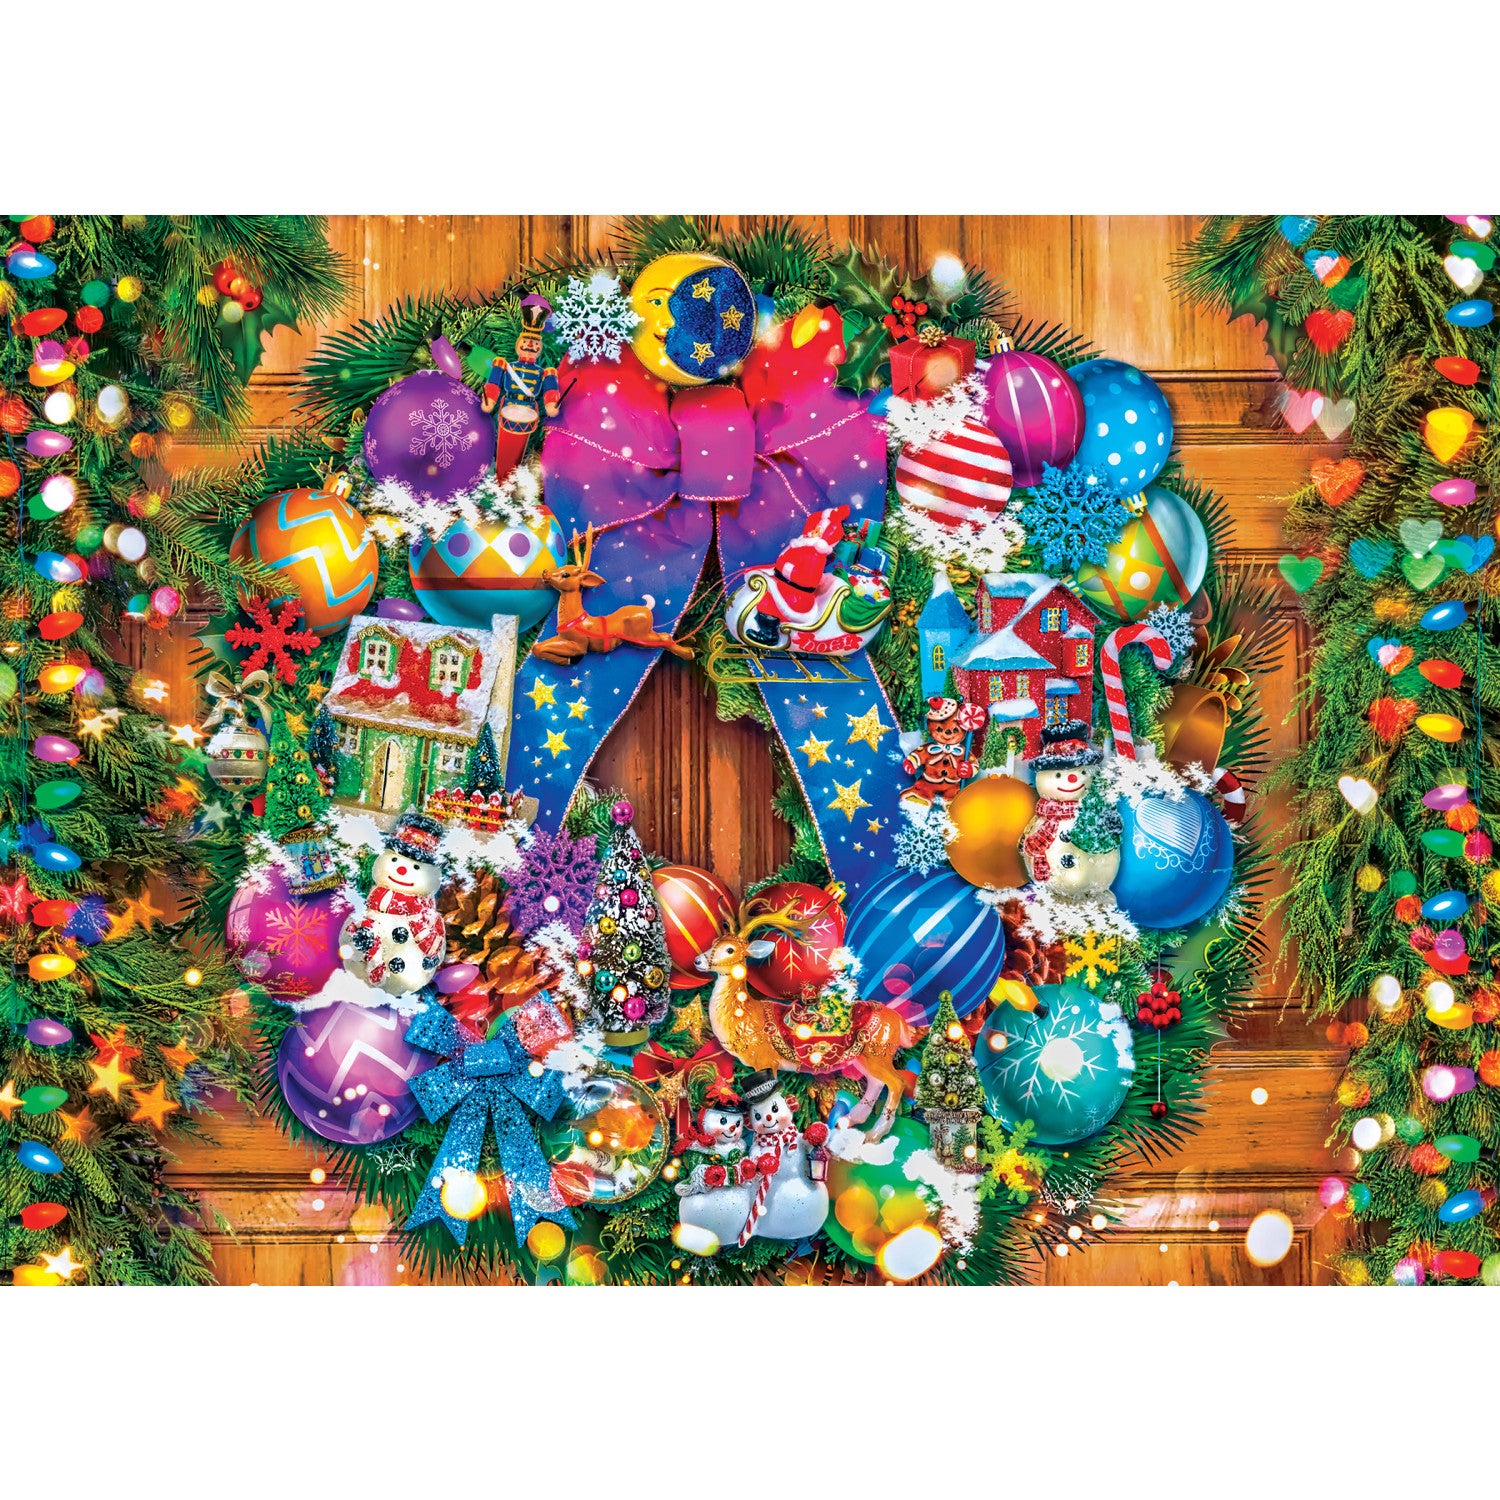 Holiday Glitter Christmas- Vintage Ornament Wreath 500 Piece Puzzle